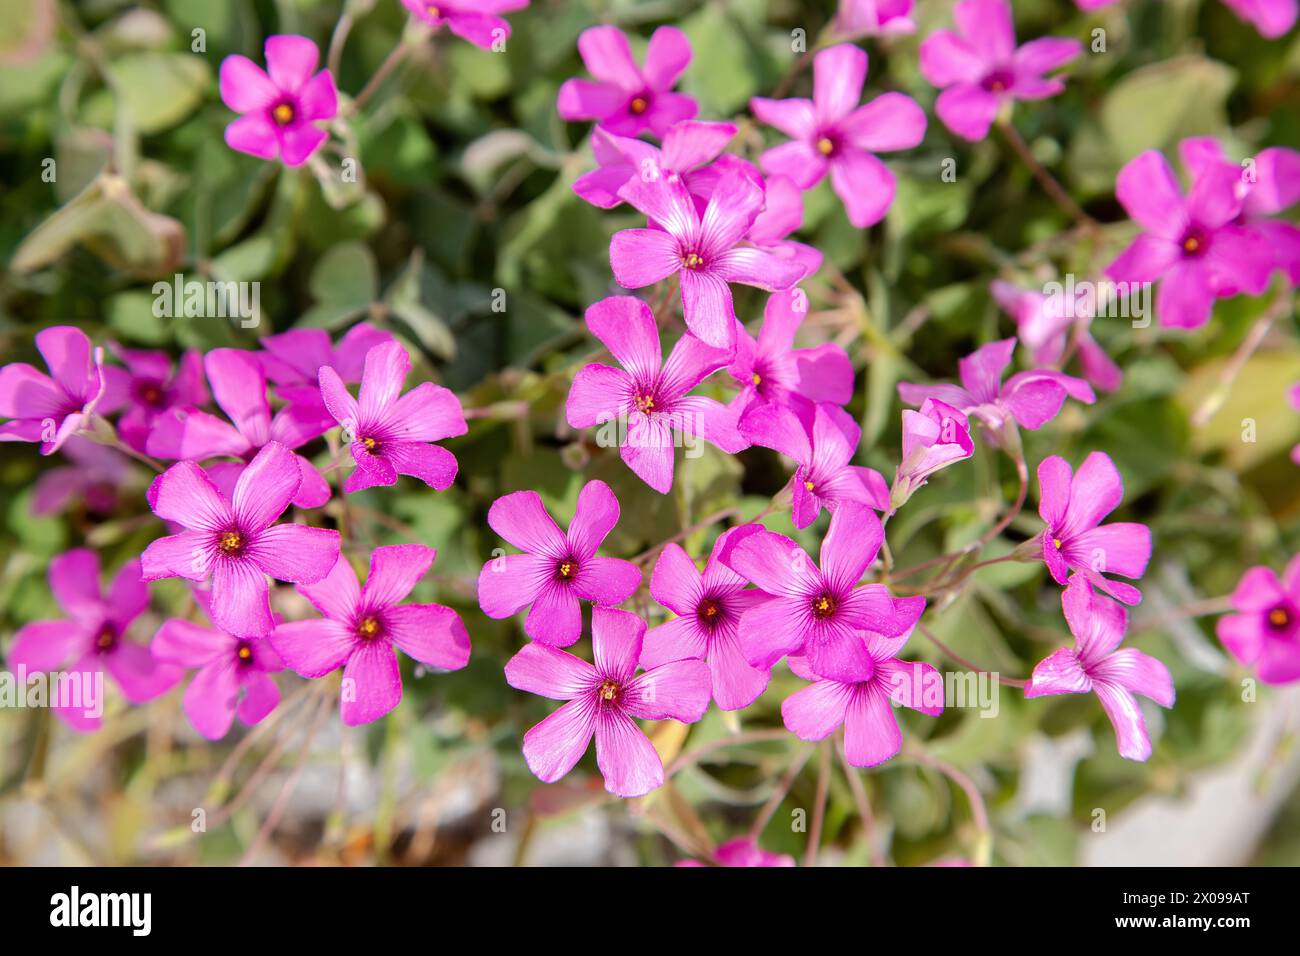 Oxalis articulata, or rose clover. Flowery background. Pink flowers in the garden. Stock Photo